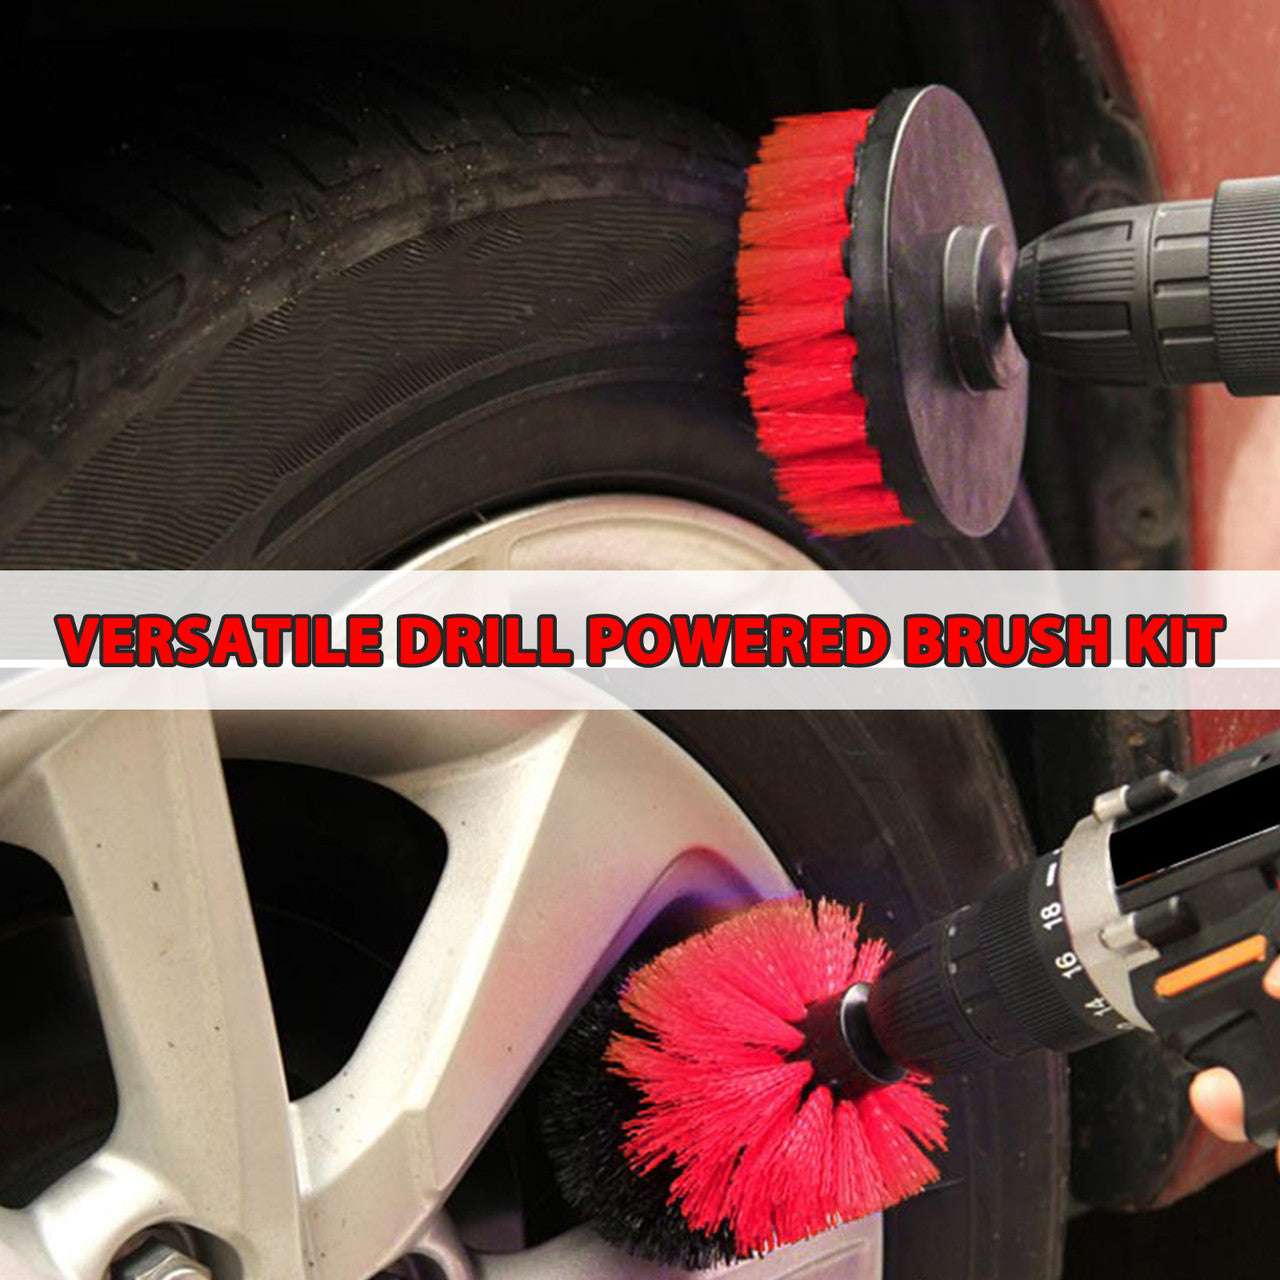 Drill Brush Attachment Set, Scrub Brush Drill Powered Car Detailing Cleaning Brush Kit - Universal for Auto, Bathroom Toilet, Grout, Floor, Shower, Tile, Sinks, Kitchen, Red, 3PCS